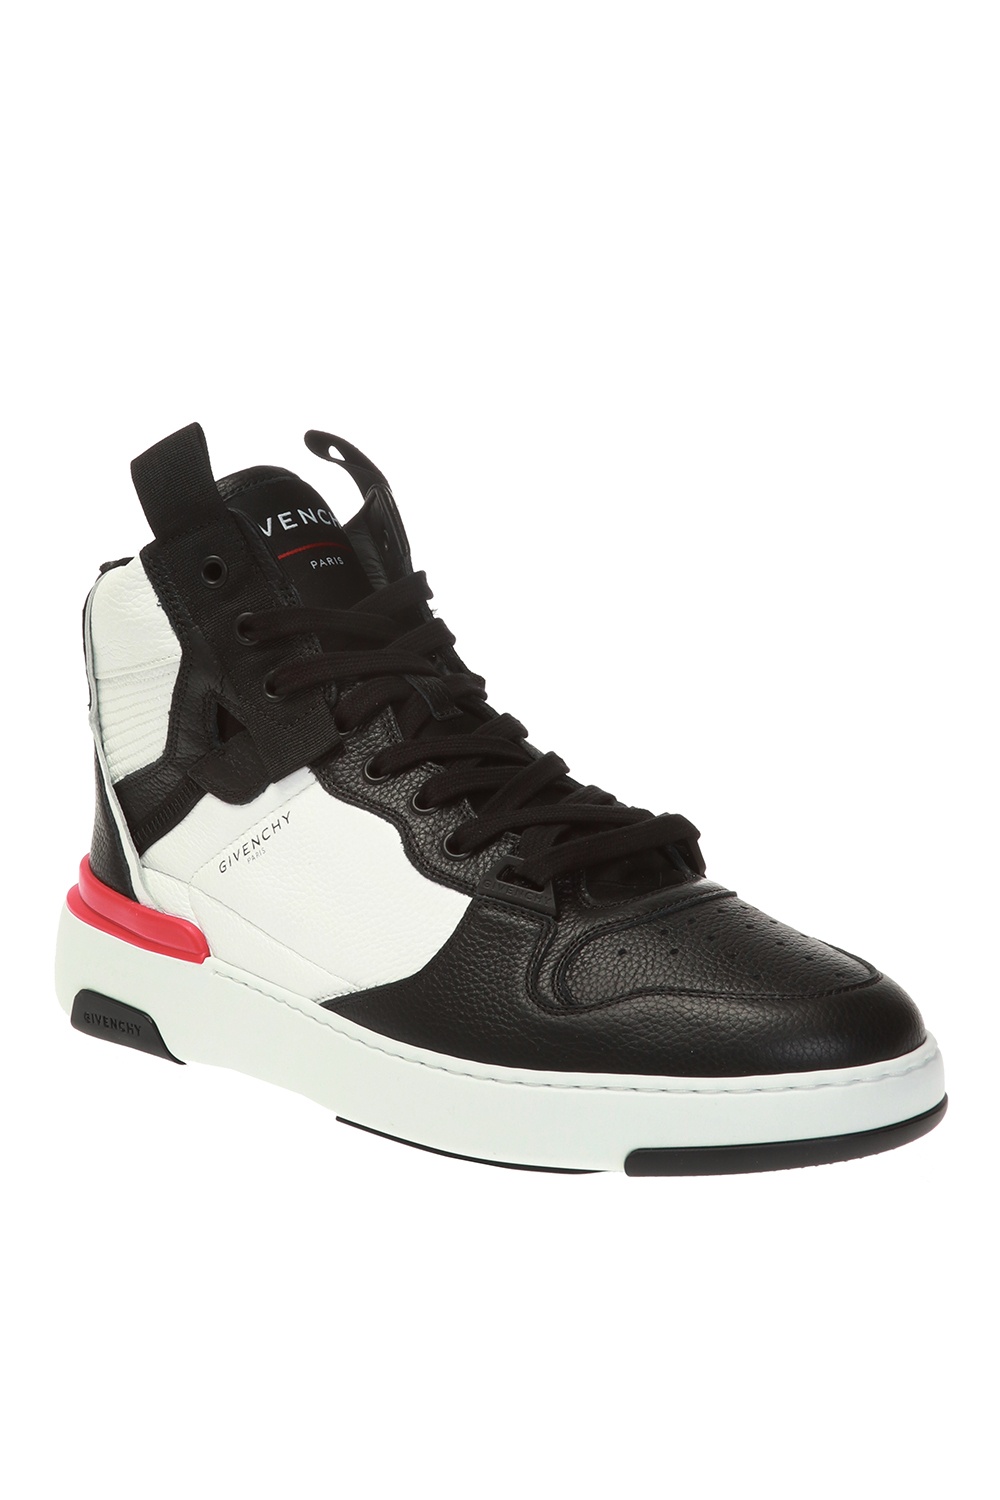 Givenchy 'Basket Wing' sneakers | Men's Shoes | Vitkac